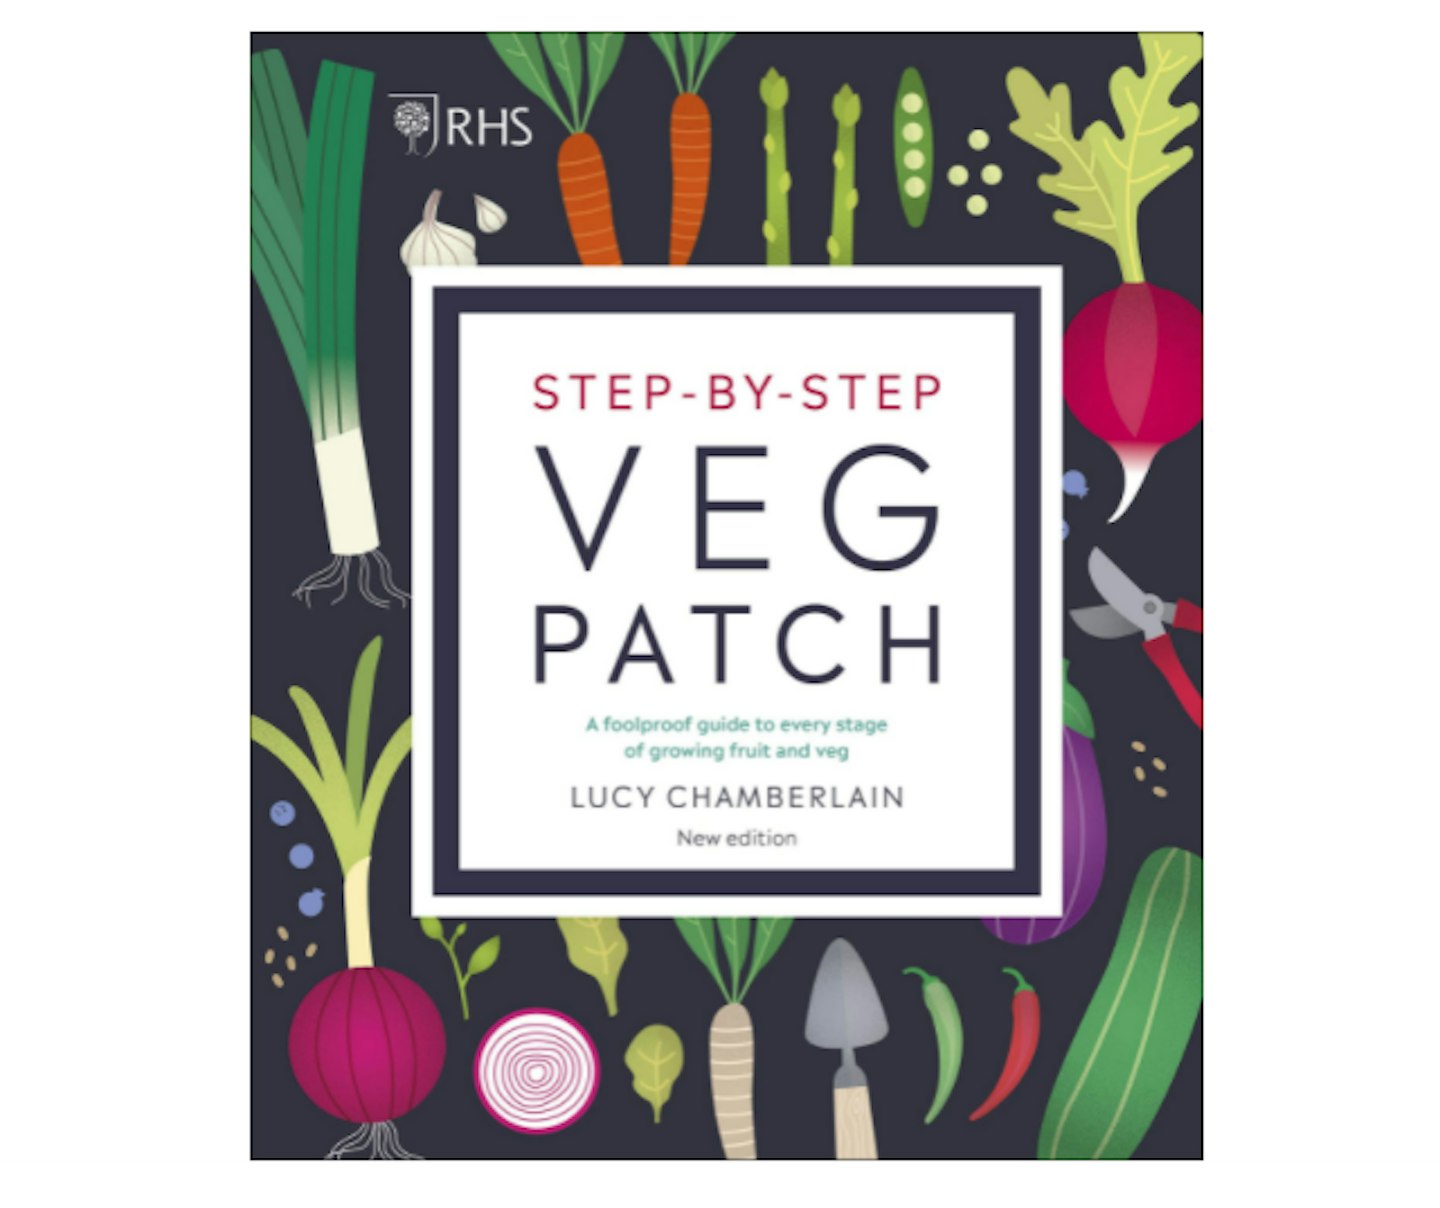 Step-by-Step Veg Patch: A Foolproof Guide to Every Stage of Growing Fruit and Veg